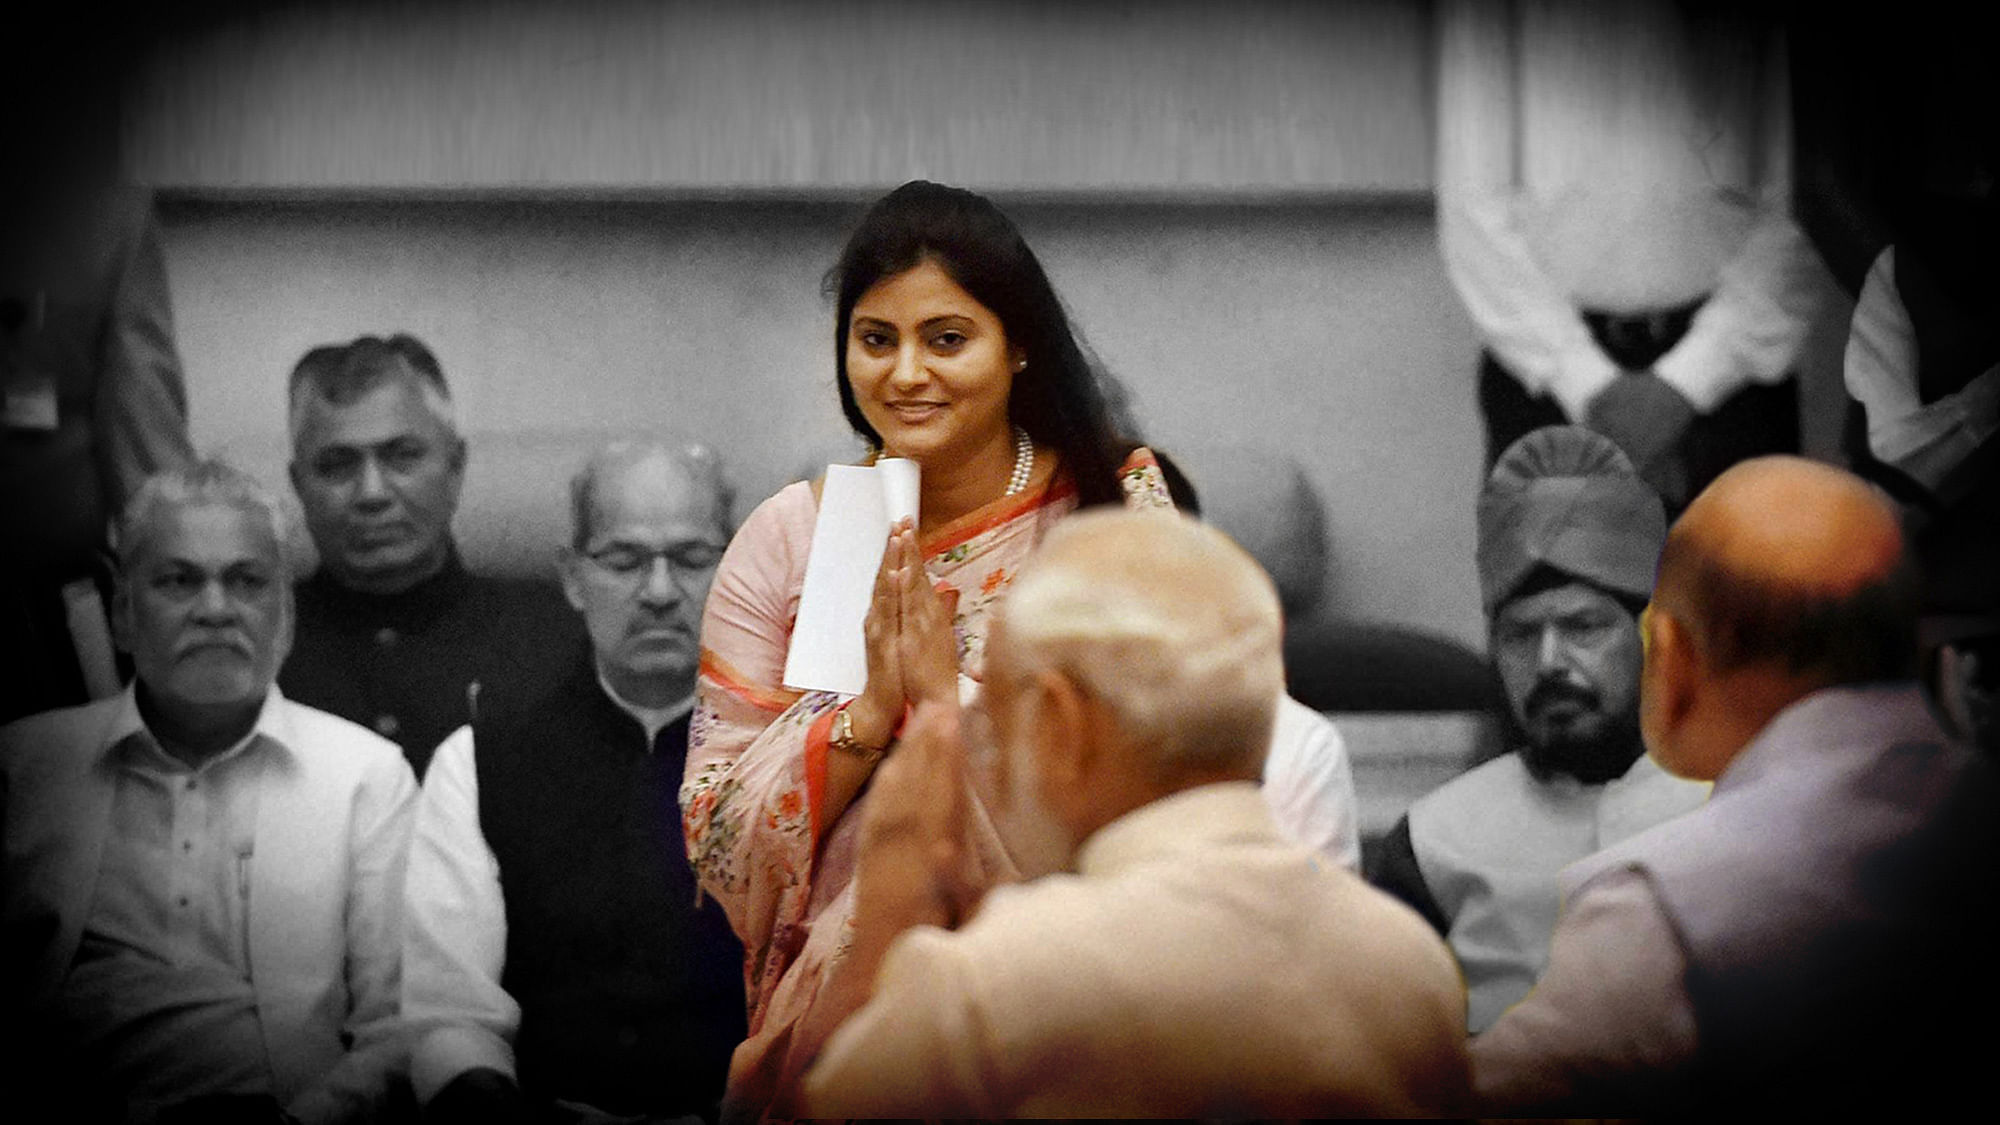 

Apna Dal leader Anupriya Patel before being sworn-in as Minister of State at a ceremony at Rashtrapati Bhavan in New Delhi on Tuesday. (Photo: PTI/ Altered by <b>The Quint</b>)